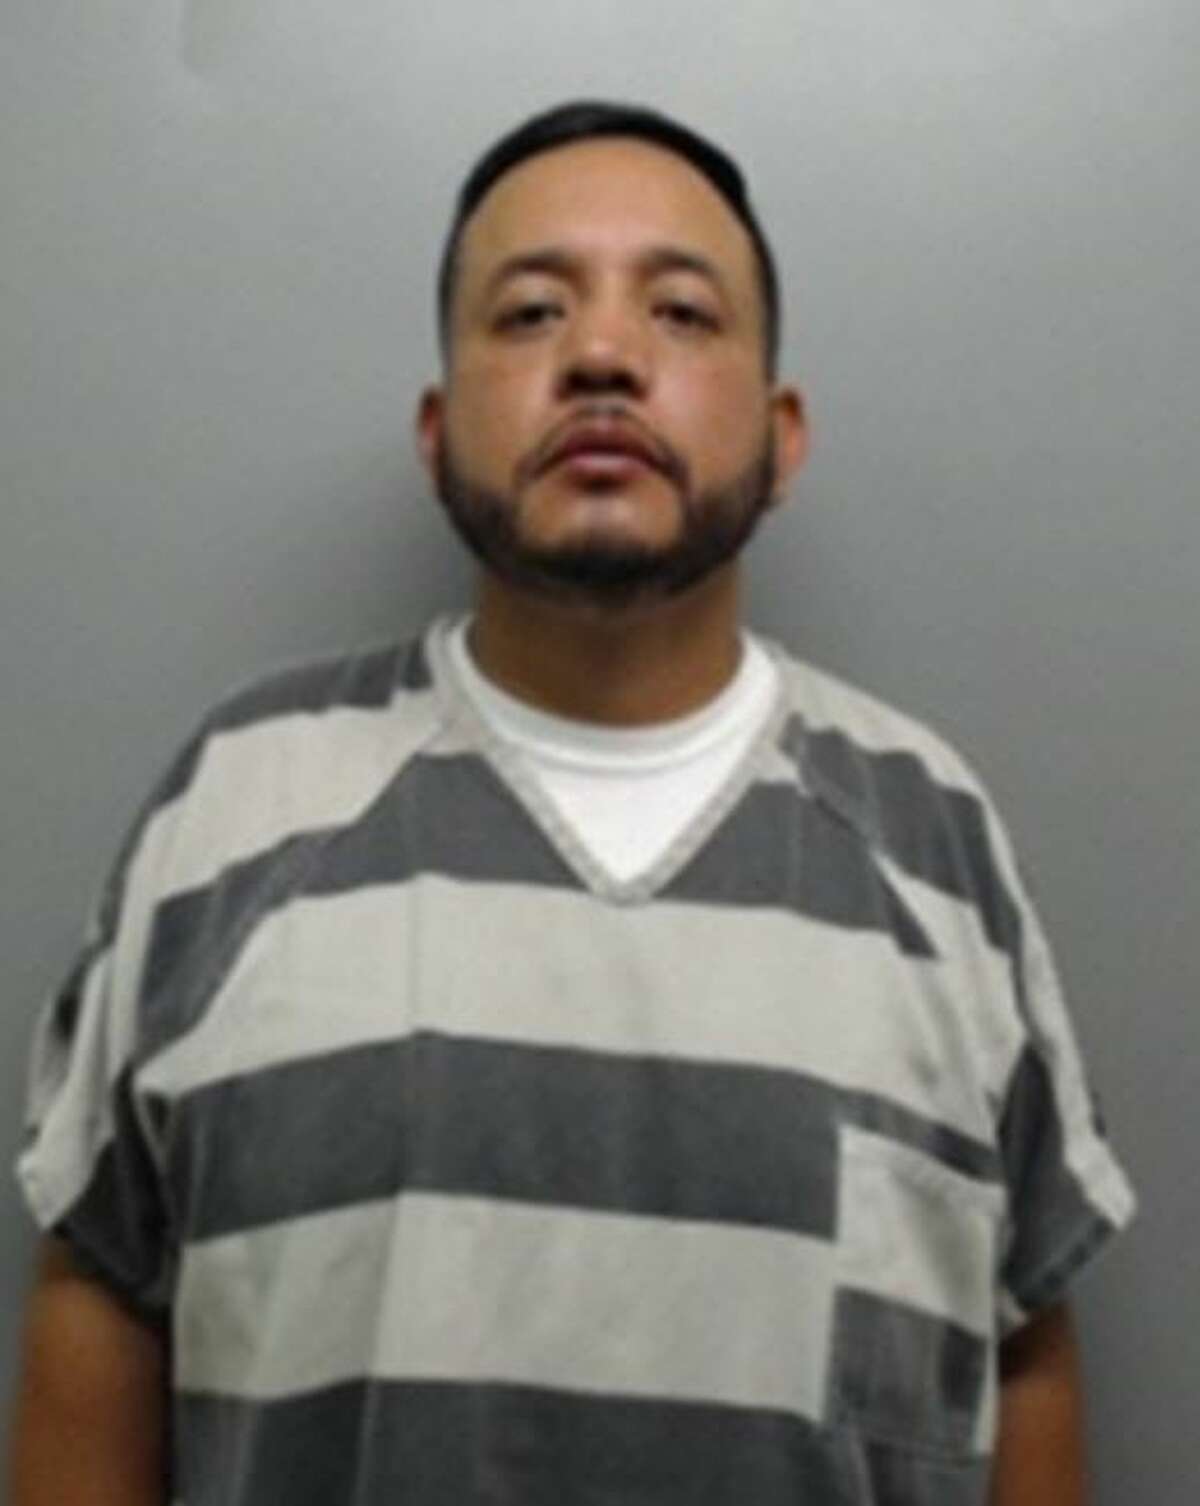 Daniel Martinez, 40, was served with warrants charging him with sexual assault of a child and two counts of prohibited sexual conduct.